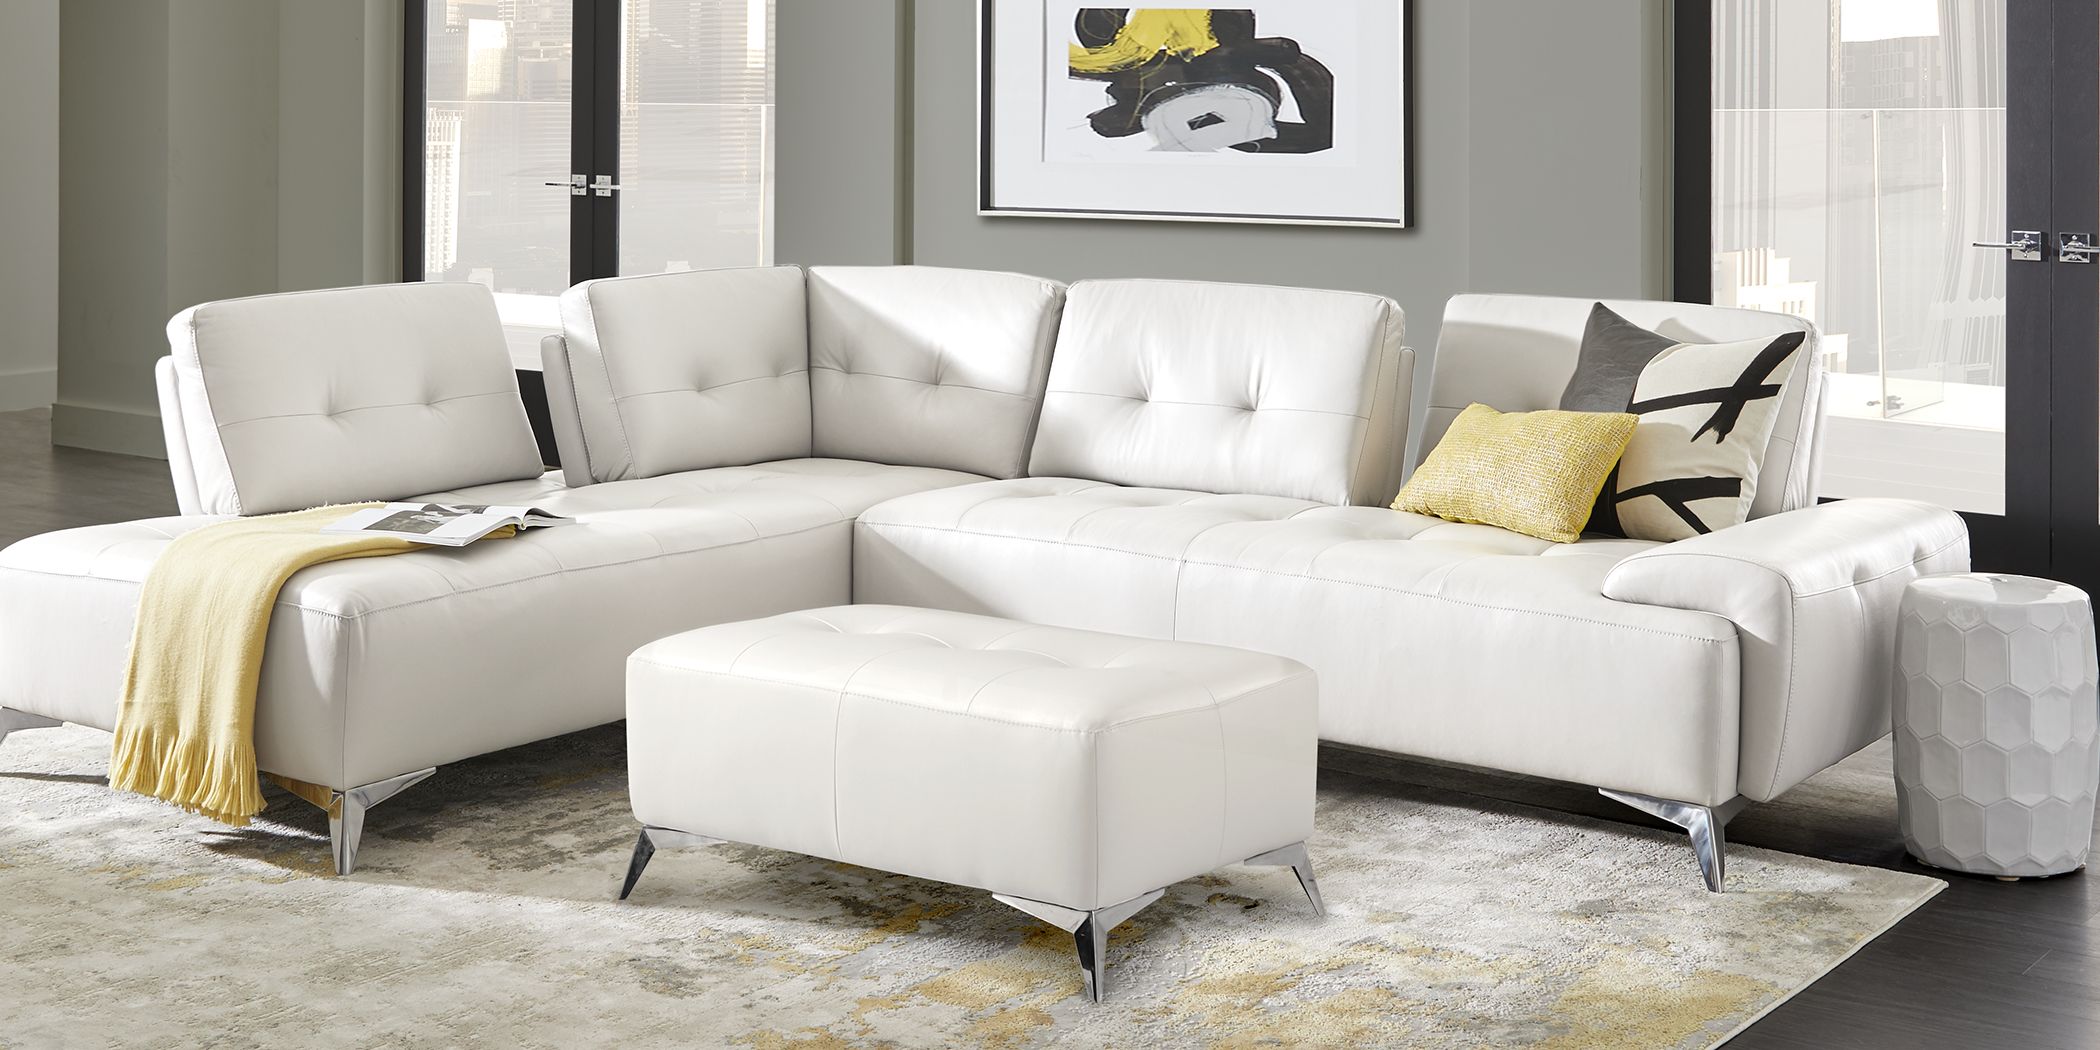 White Leather Living Room Sets On Sale